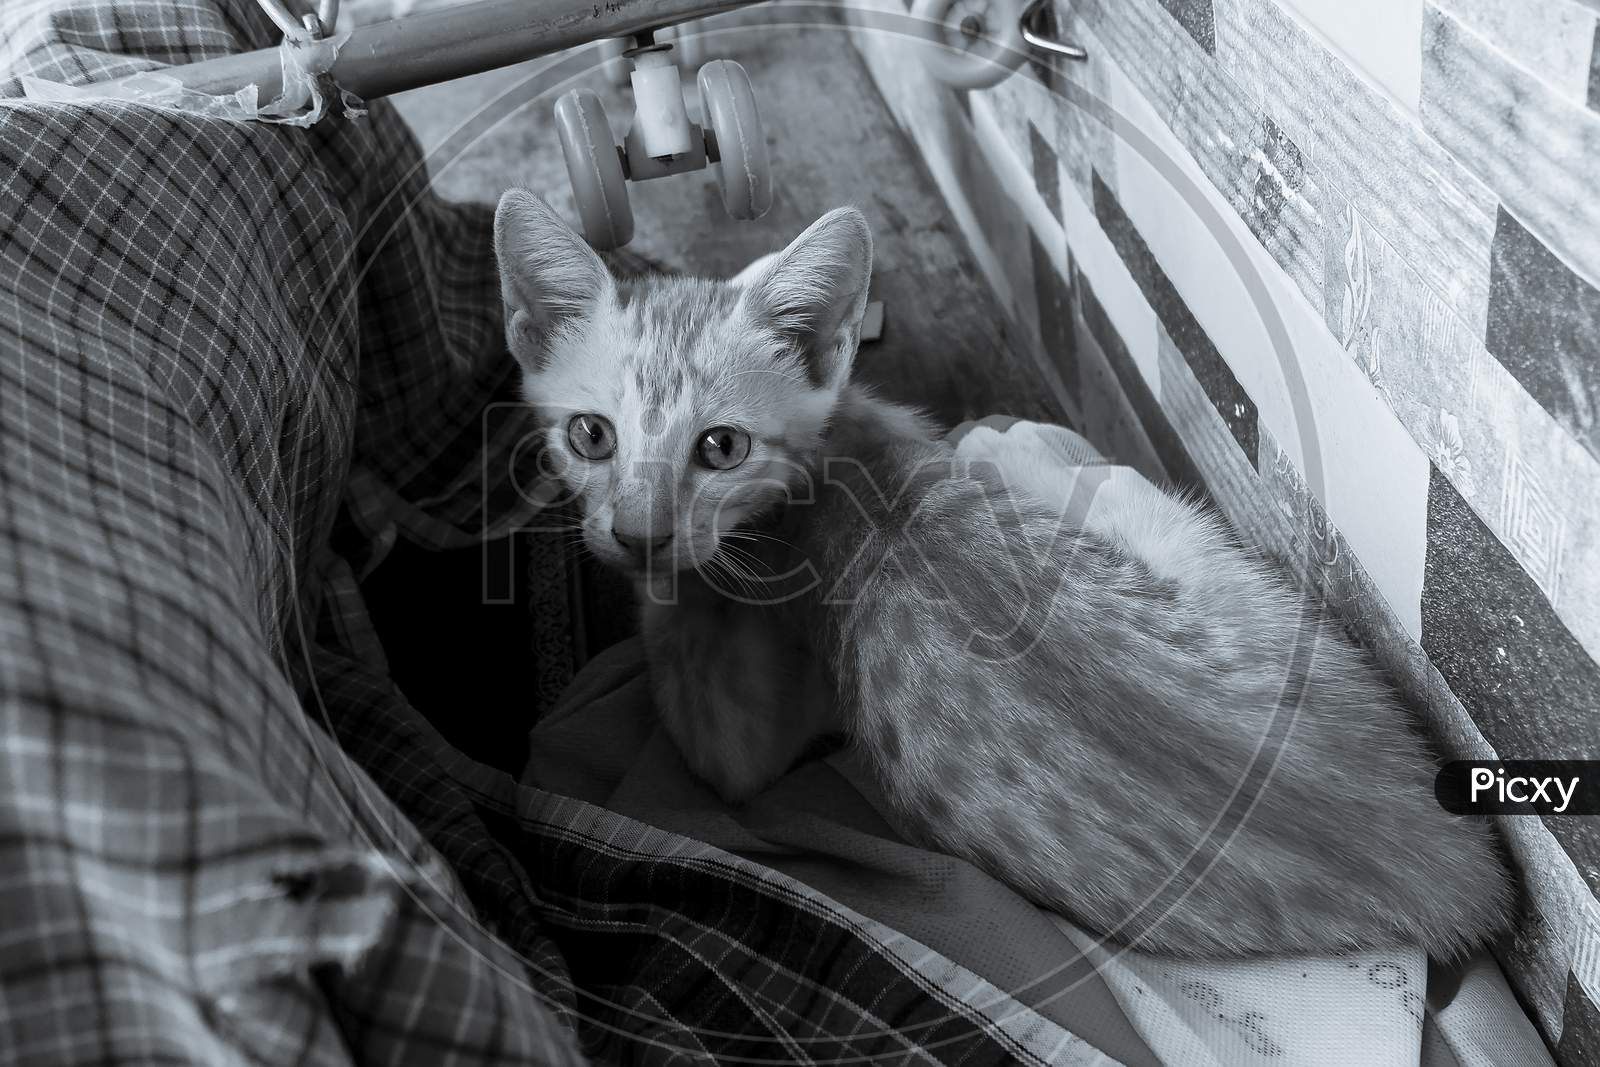 Closeup View Of Kitten Looking Camera In Black & White Picture